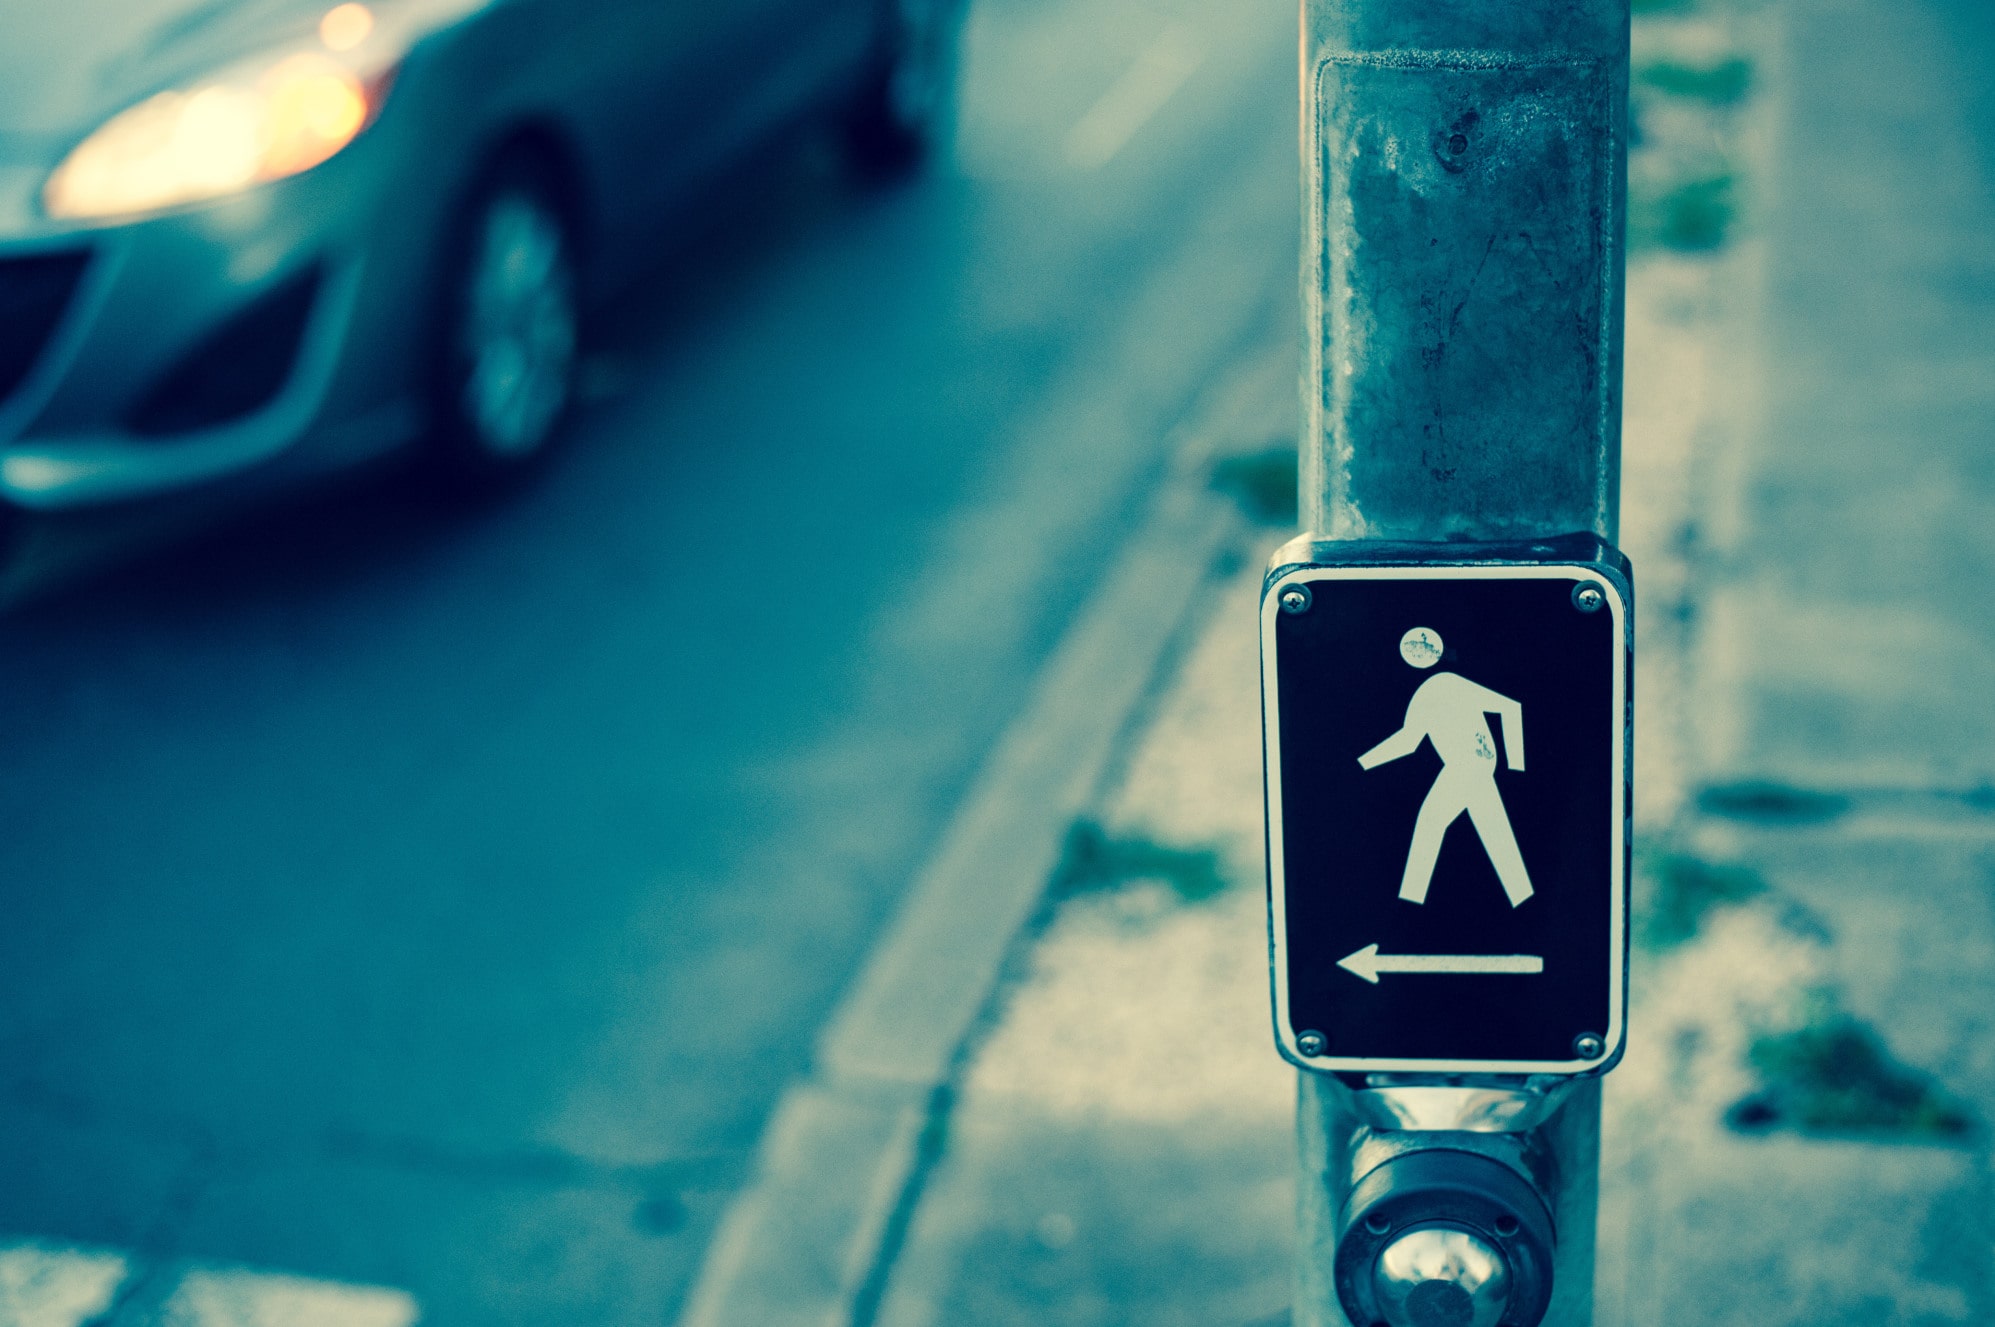 What are the main causes of pedestrian accidents in BC?